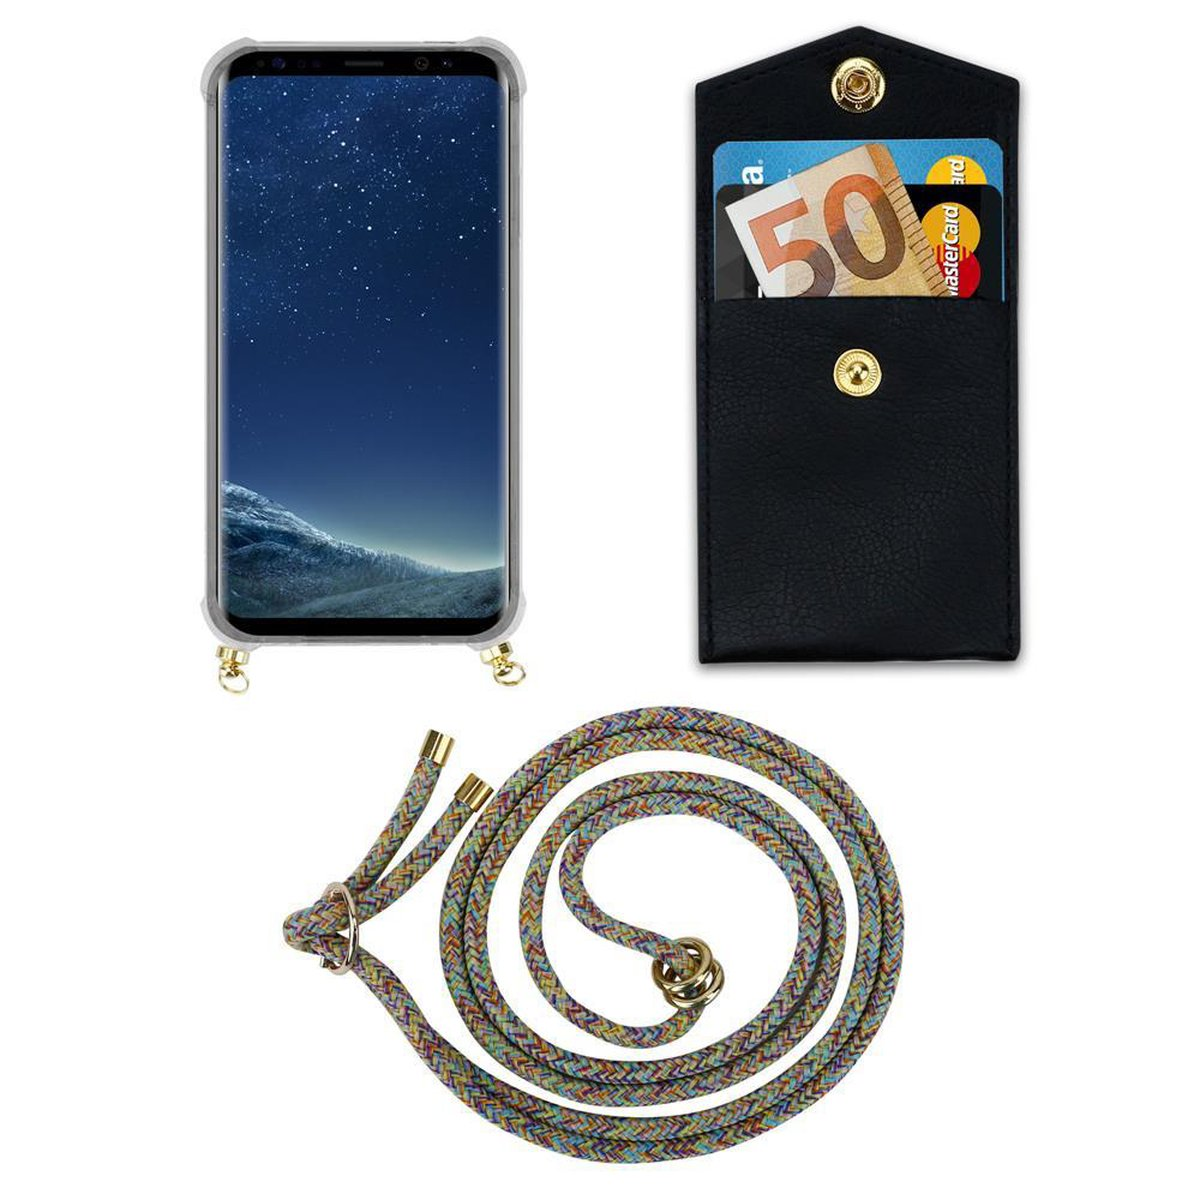 Ringen, S8, Backcover, Handy Hülle, Band mit Samsung, RAINBOW Kette und Kordel abnehmbarer Galaxy CADORABO Gold